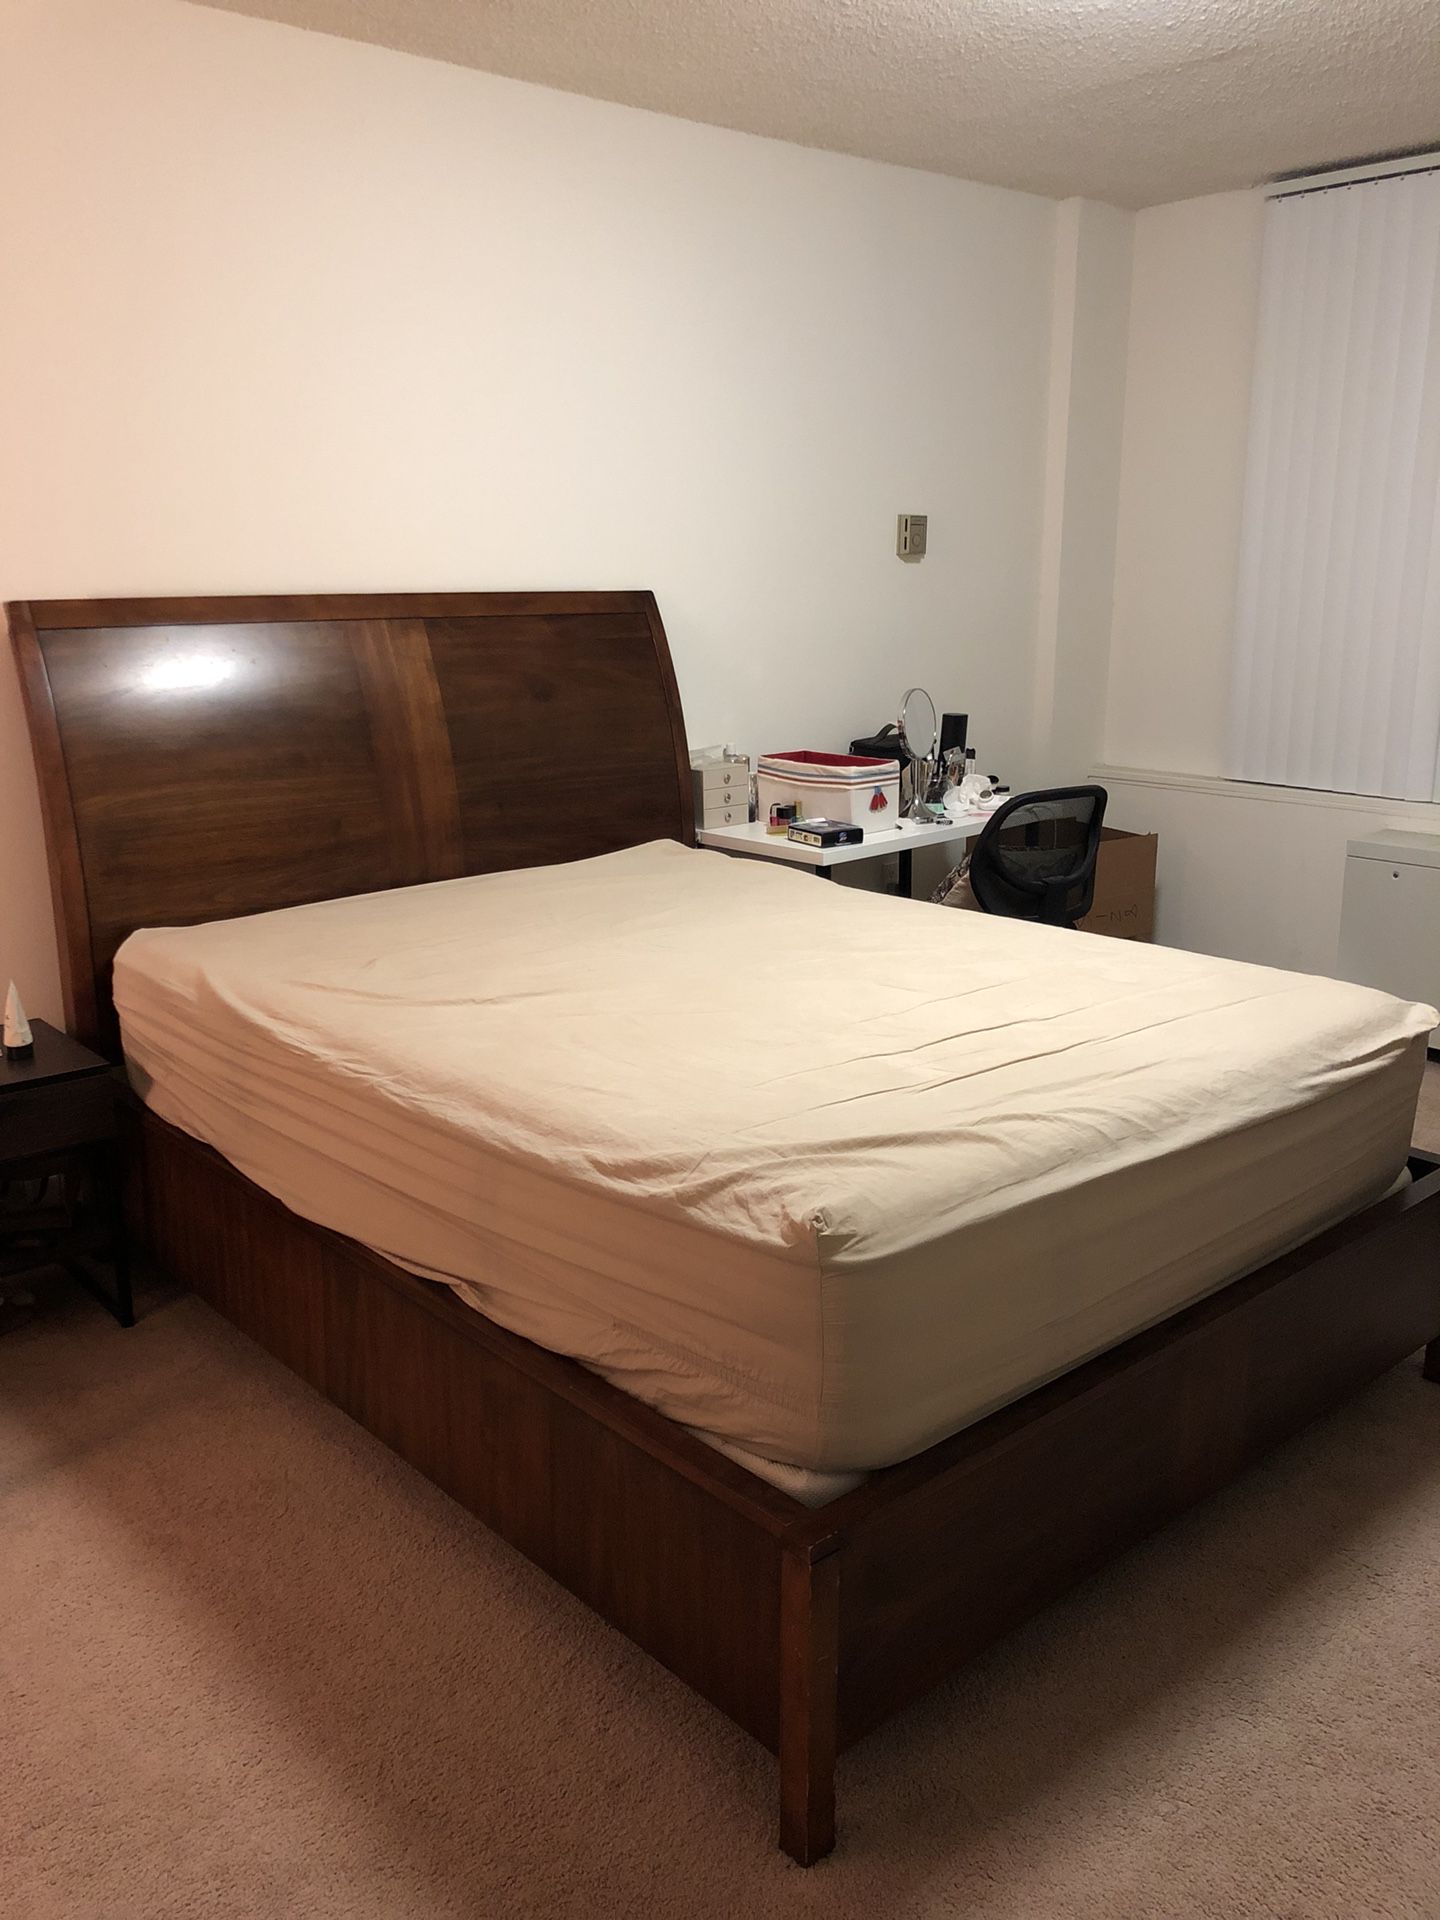 Queen bed frame and box spring (mattress not included)